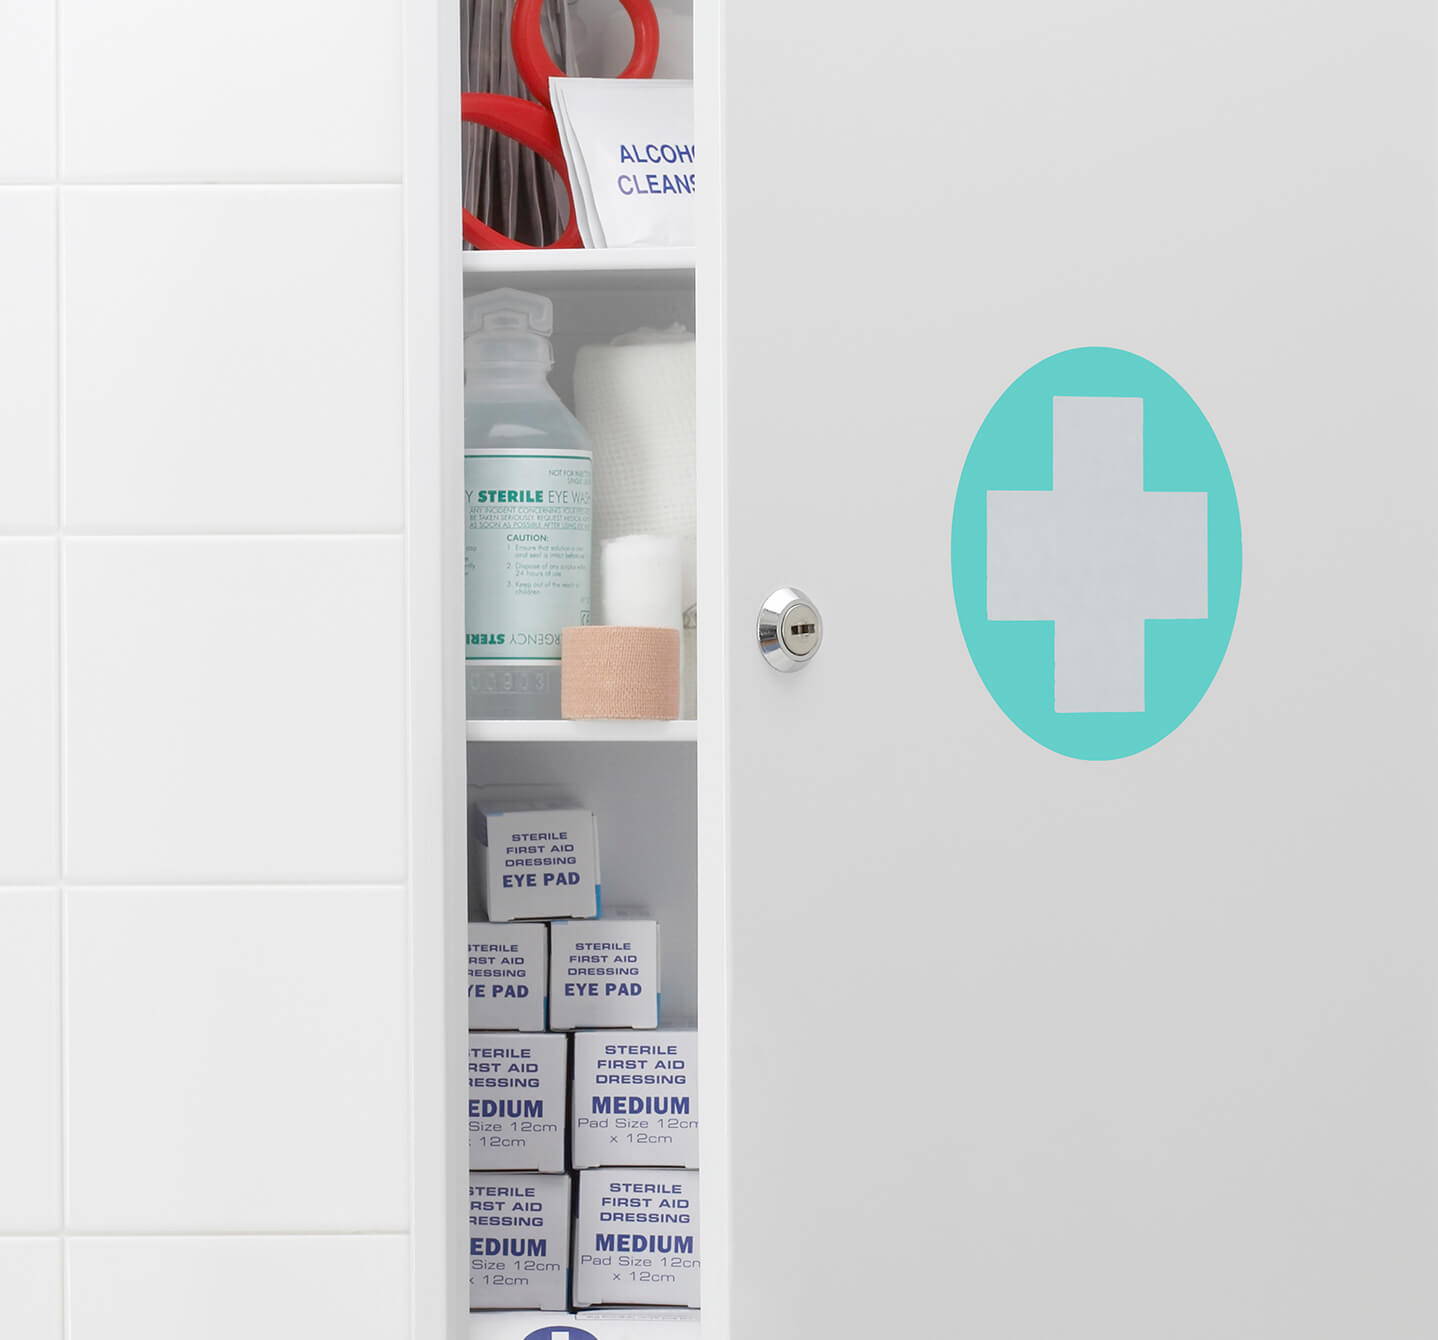 Bathroom cabinet with a white cross on a mint green circle on the half-open door, ready to hold your allergy medicine